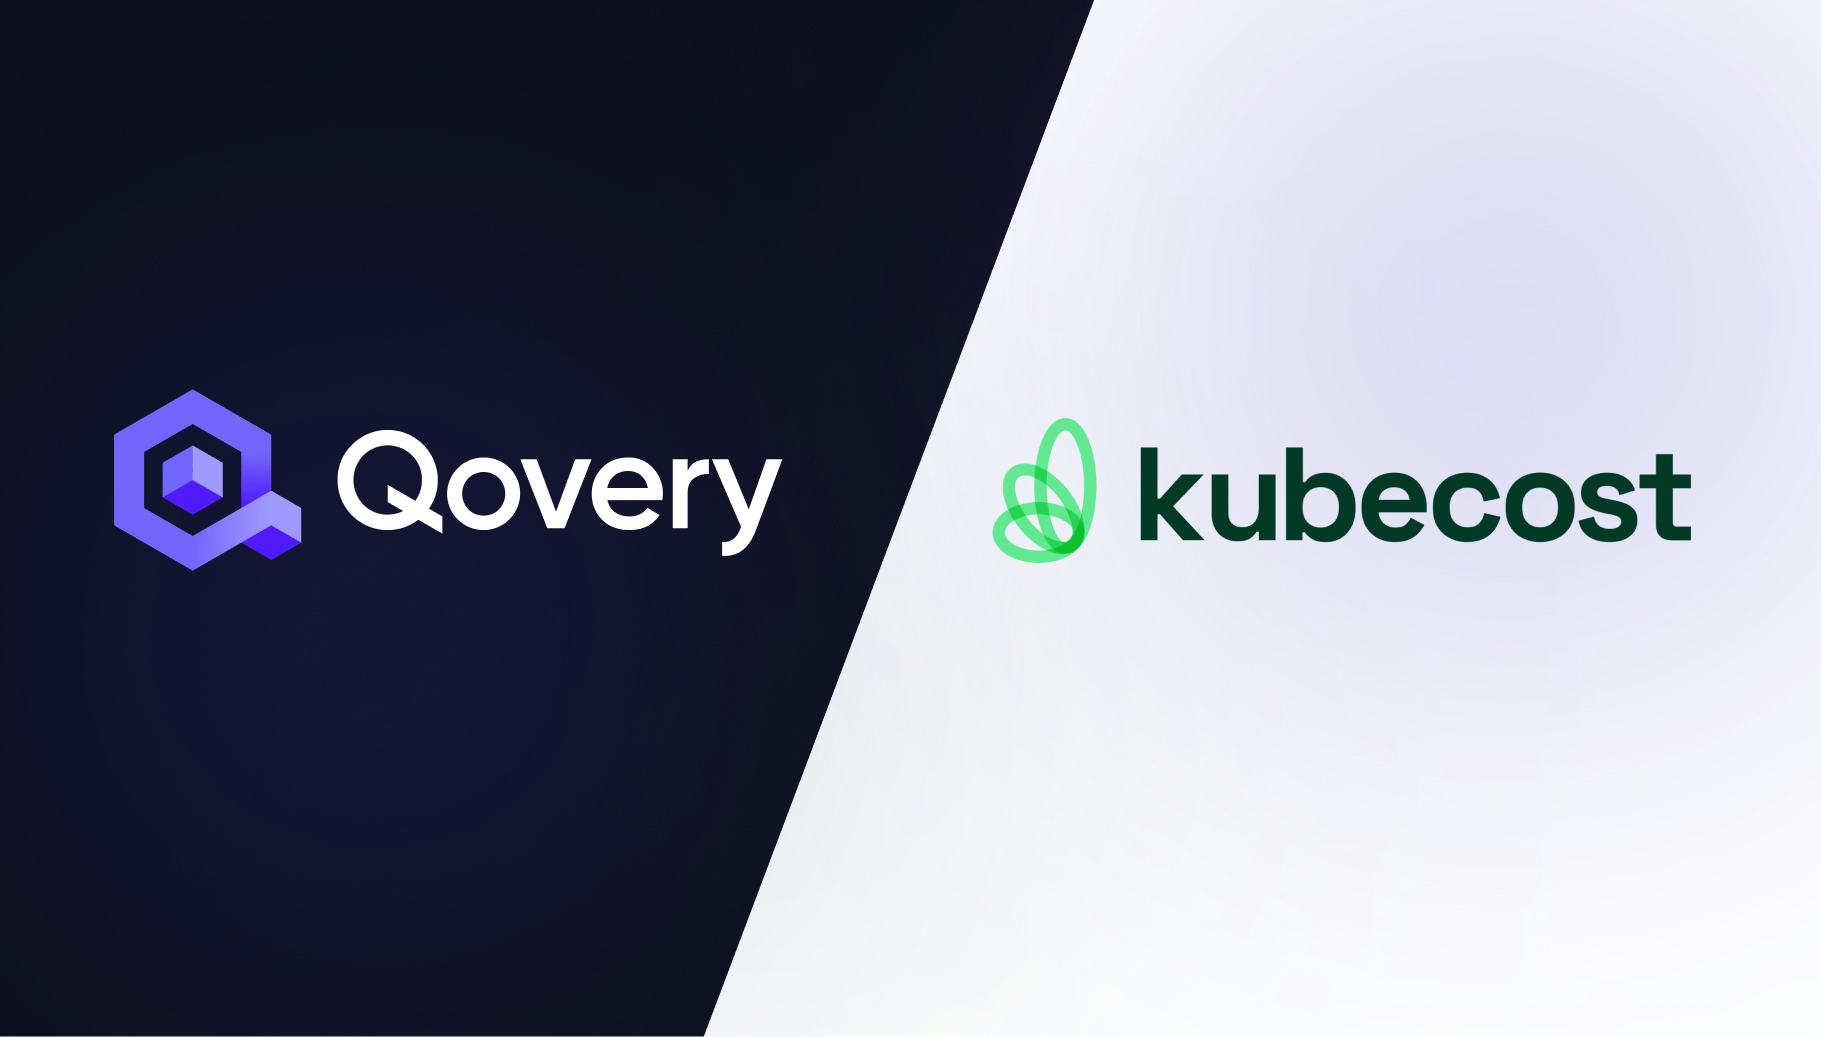 Kubecost and Qovery Team up to Offer Cost Monitoring for DevOps Teams